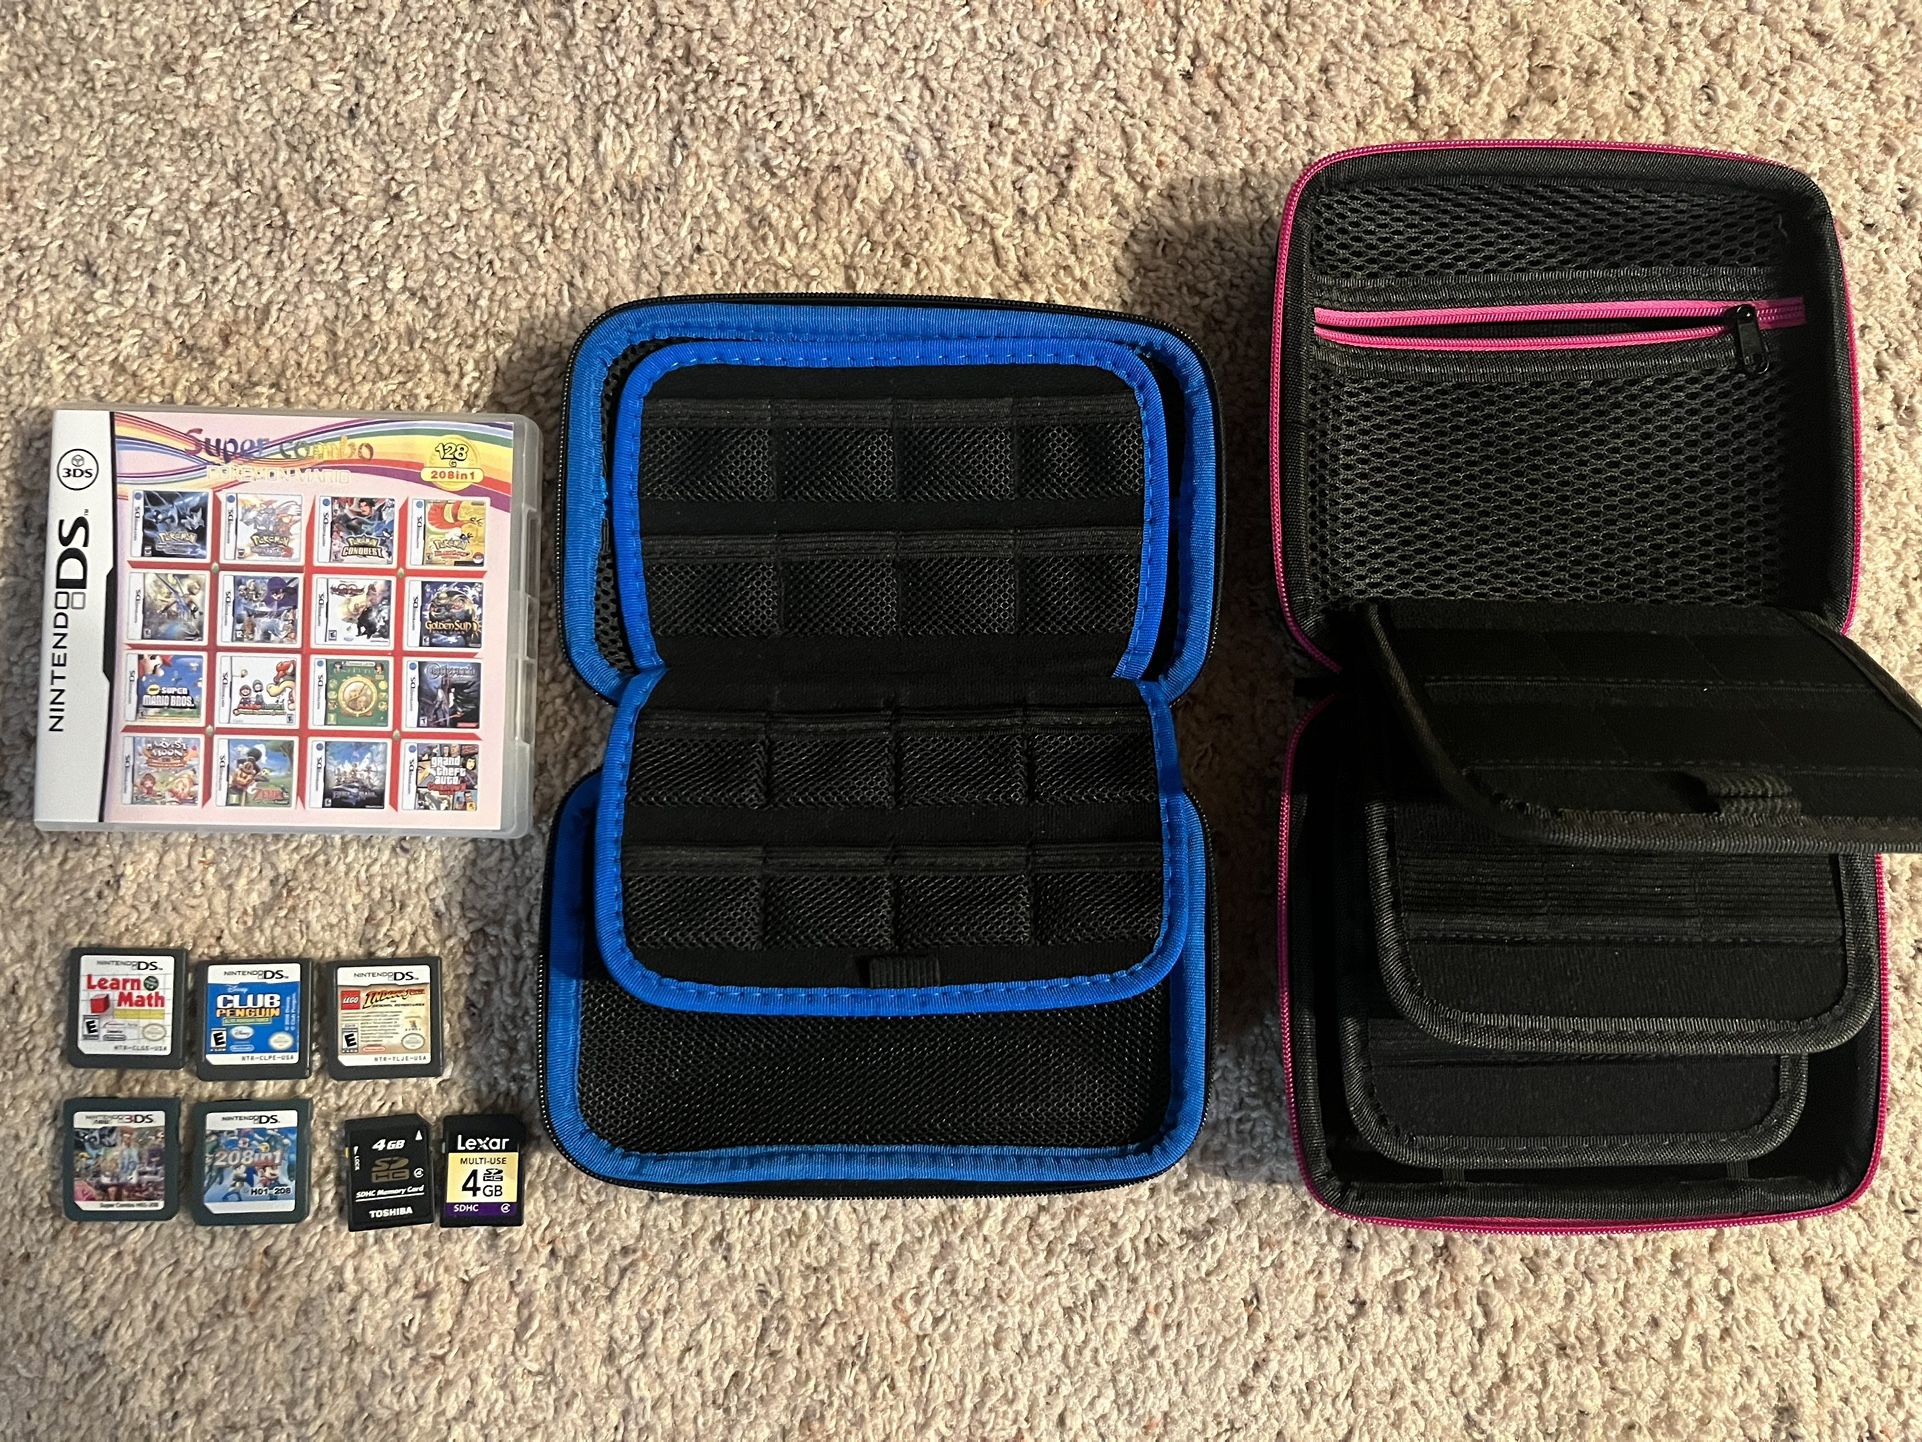 Nintendo 3DS + 2DS Cases and Games (280 In 1)